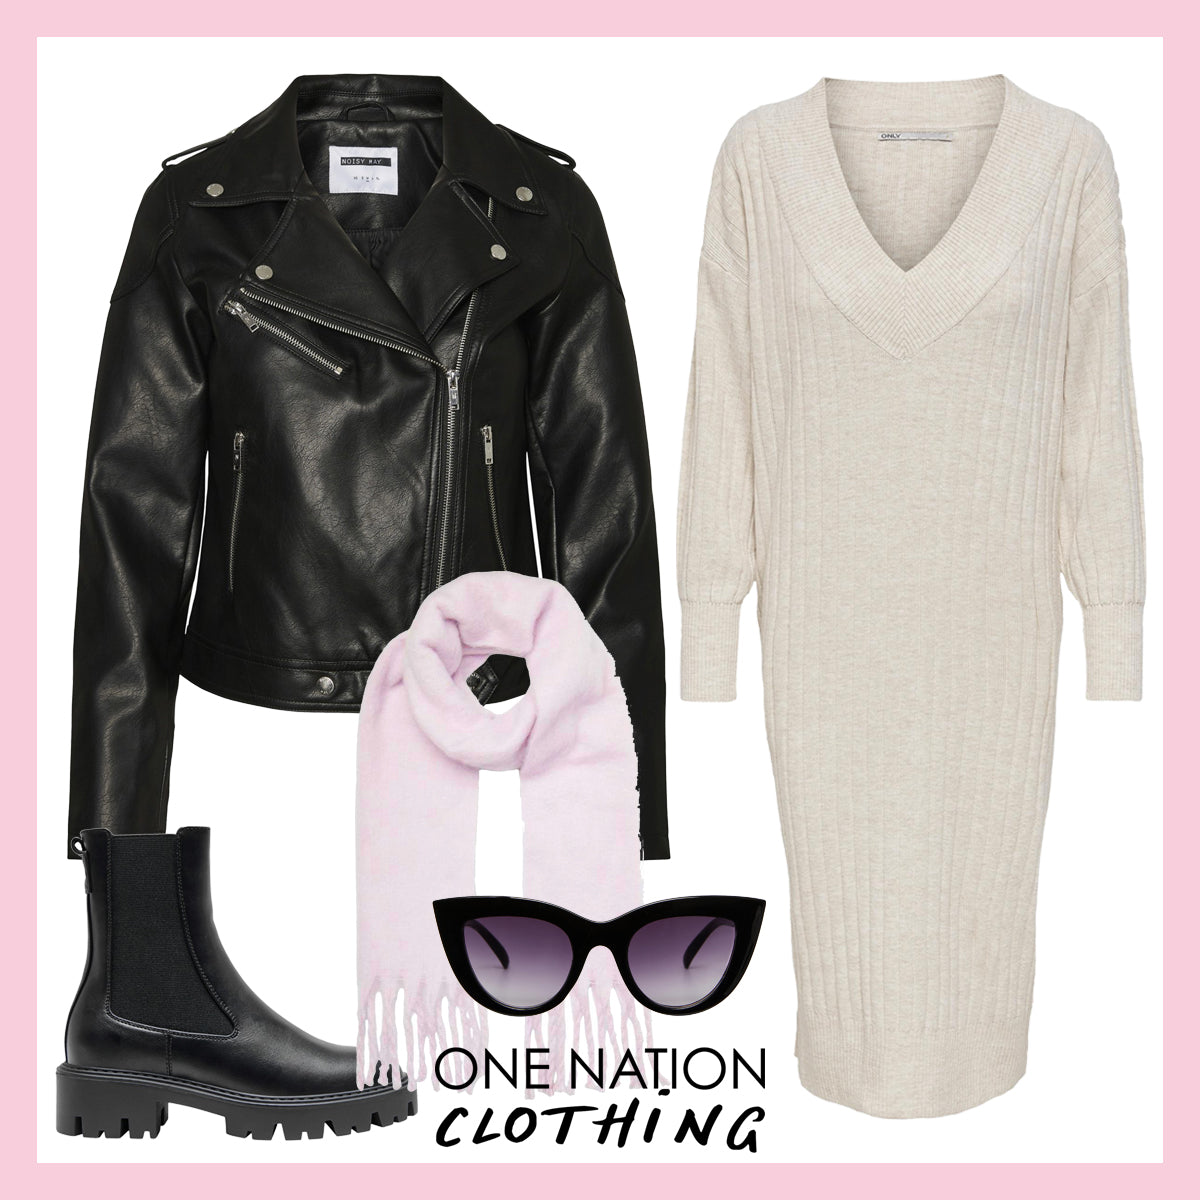 OUTFIT INSPO: The Perfect Transitional Knit Dress & Leather Jacket Combo